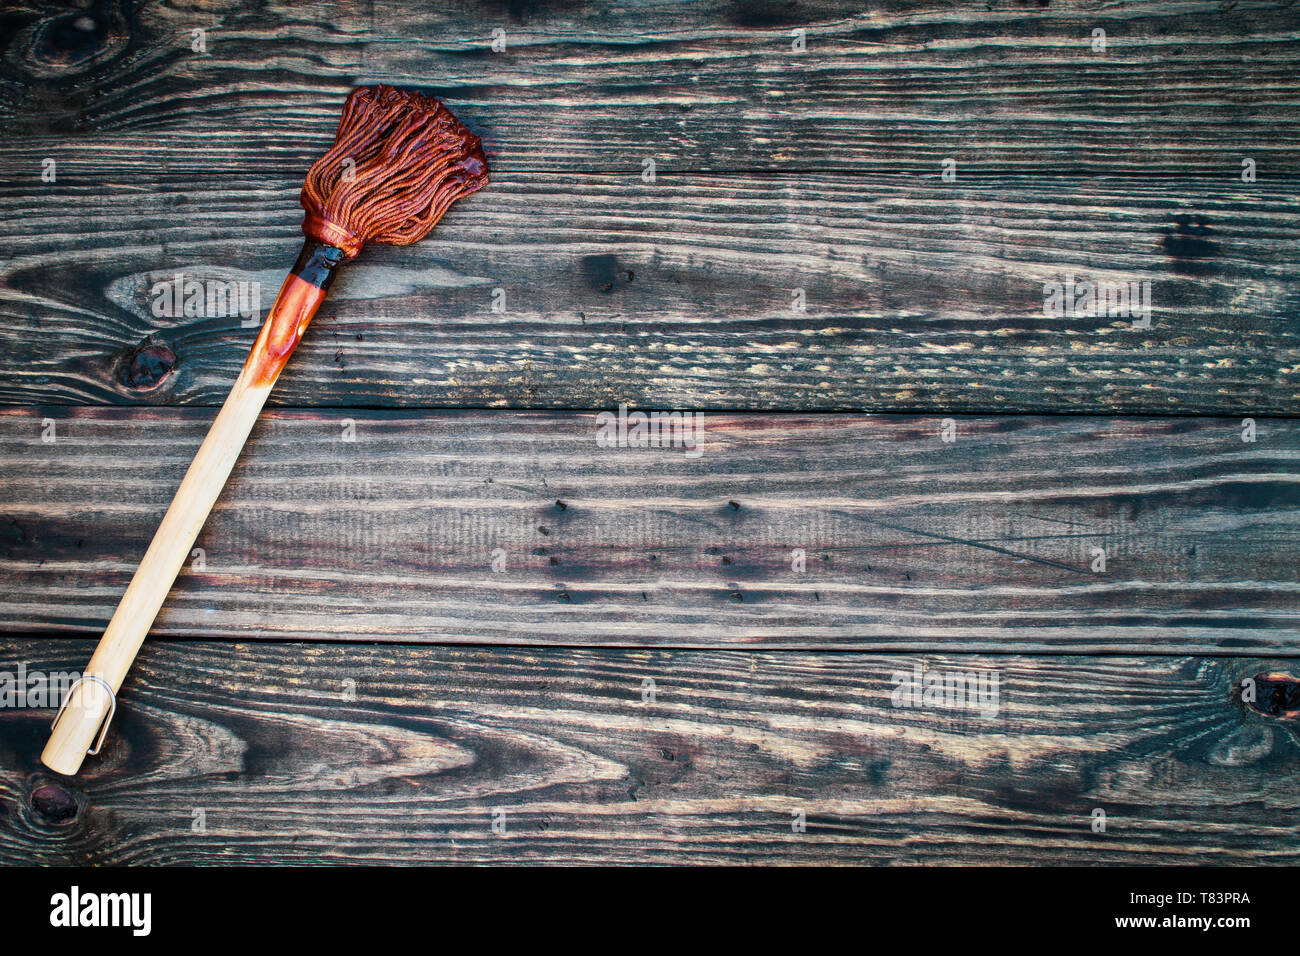 BBQ Mop or brush over top a rustic wood table / background with barbecue sauce on end. Image shot from overhead view. Stock Photo